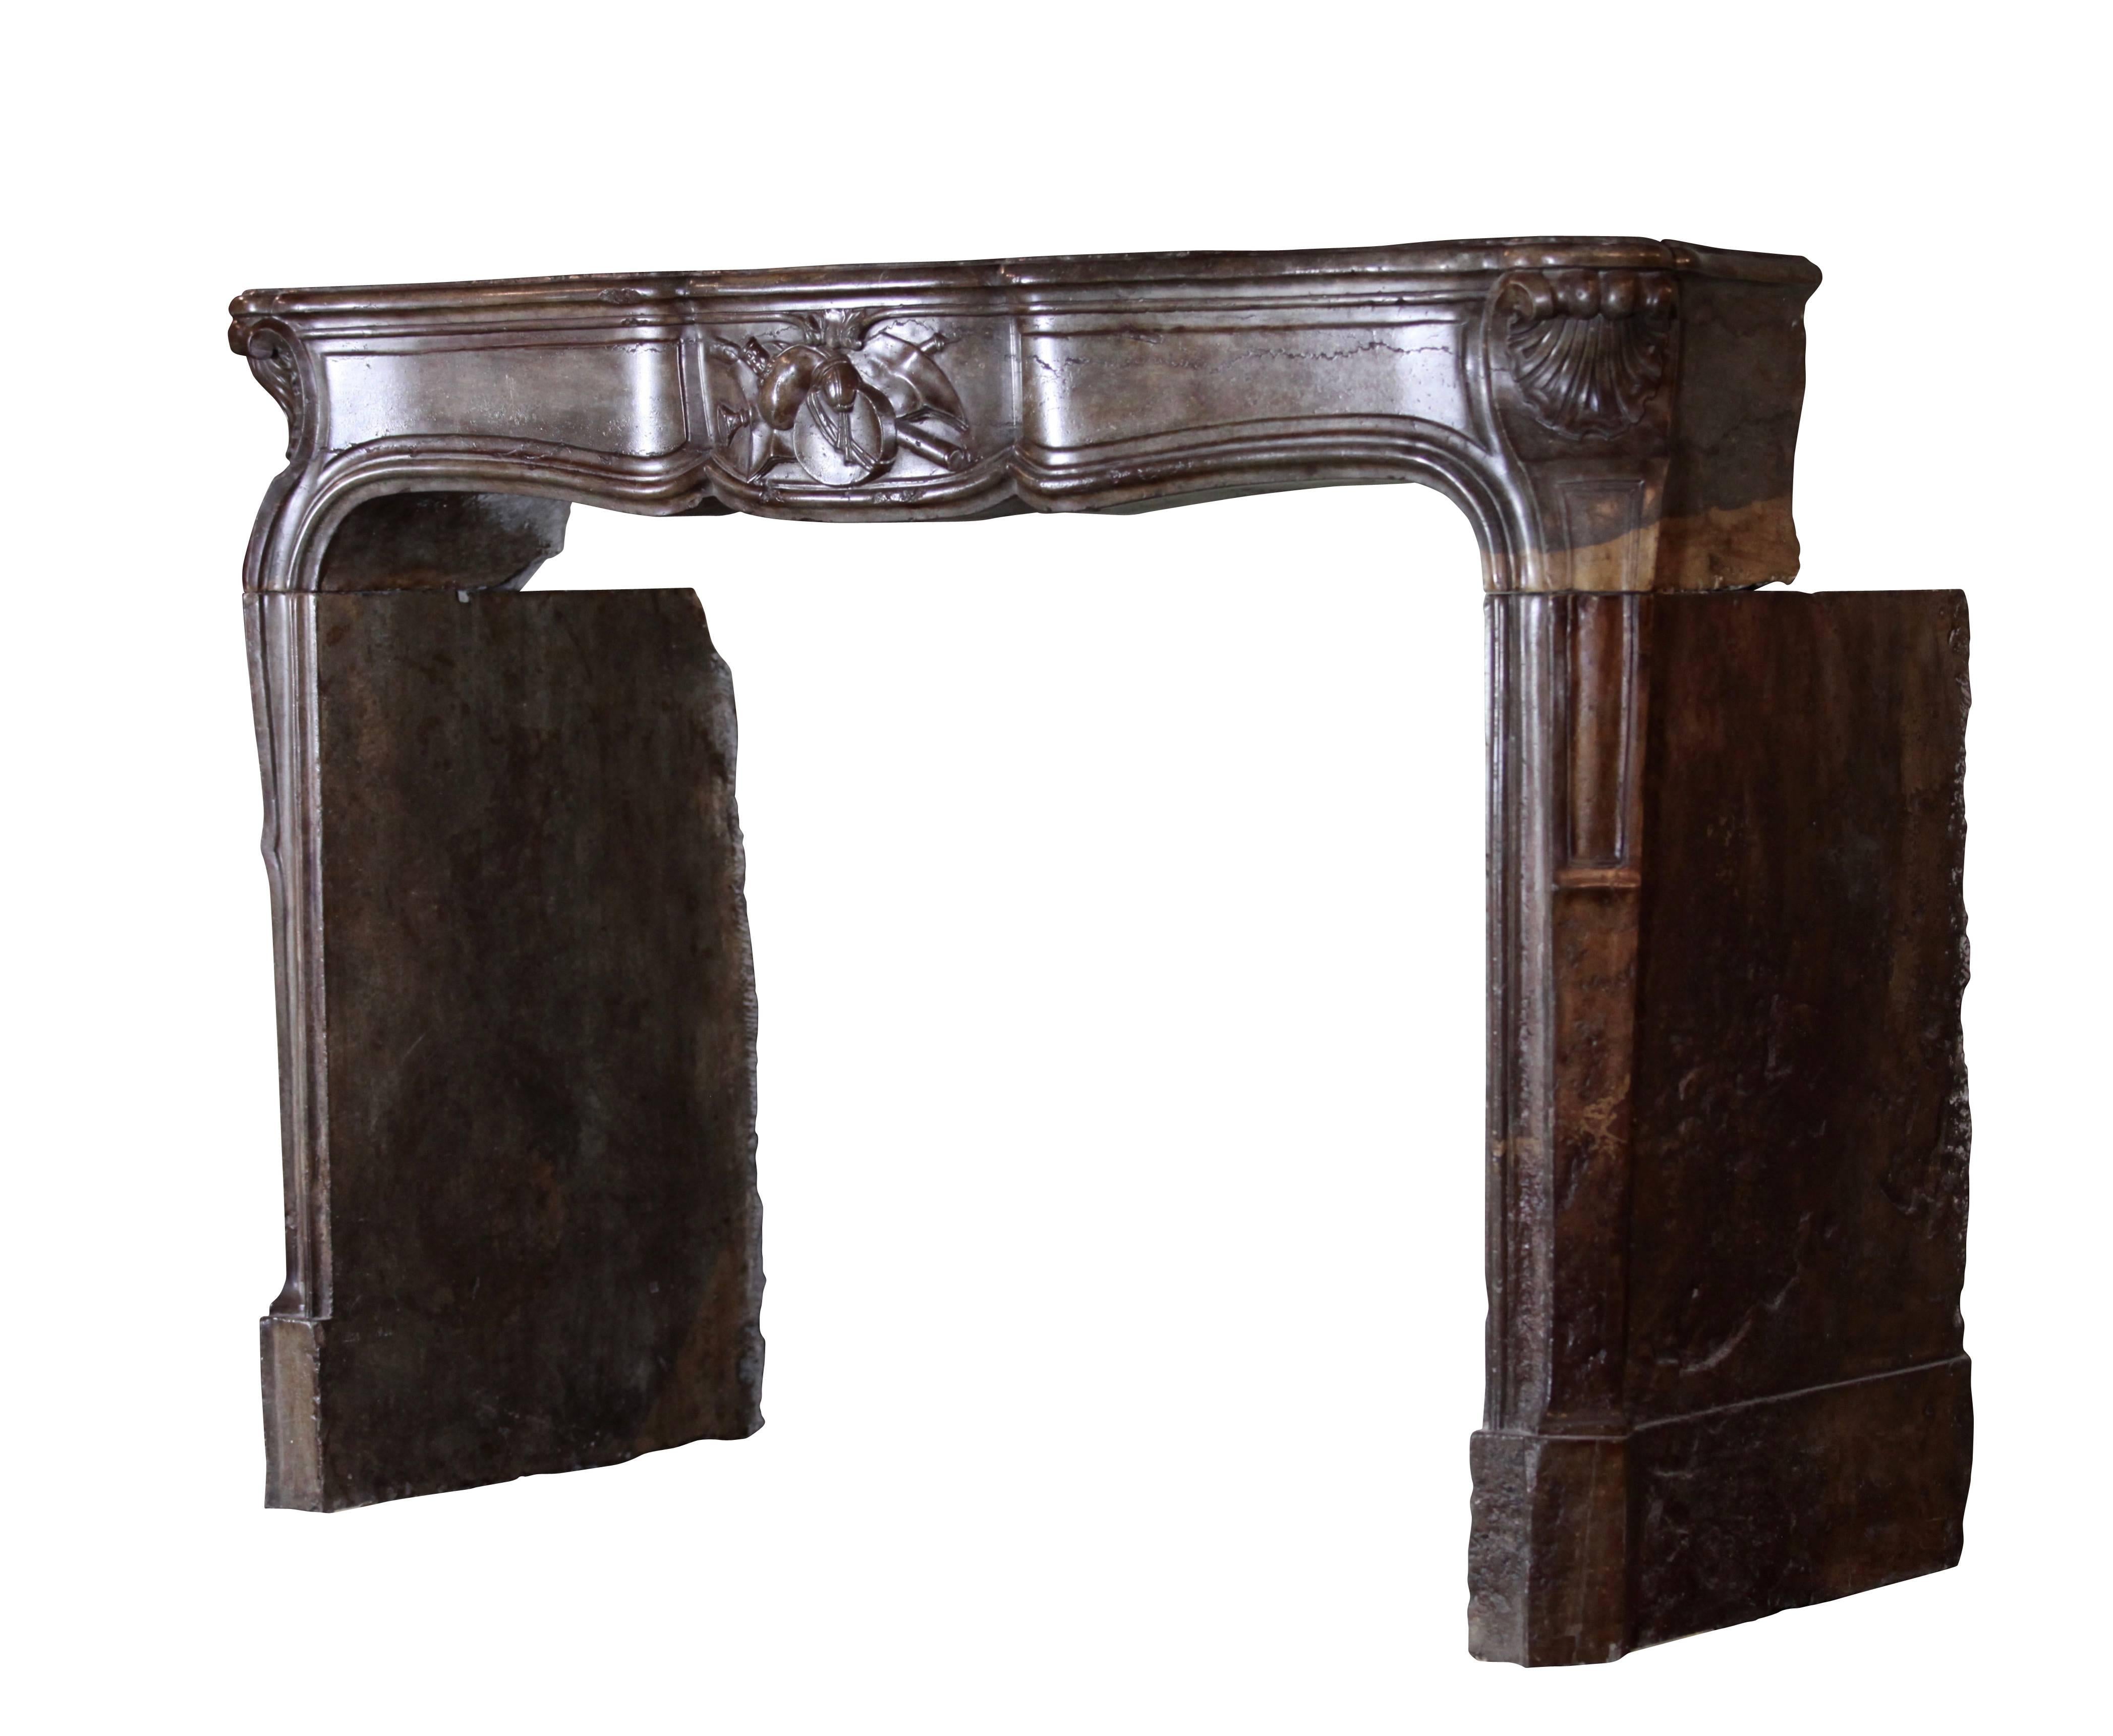 This bicolor antique fireplace surround has a very deep patina. The detail in the middle shows music instruments and is from the Directoire period. It was installed in a panneled library. Top of shelf shows some roughness. A perfect mantel for a